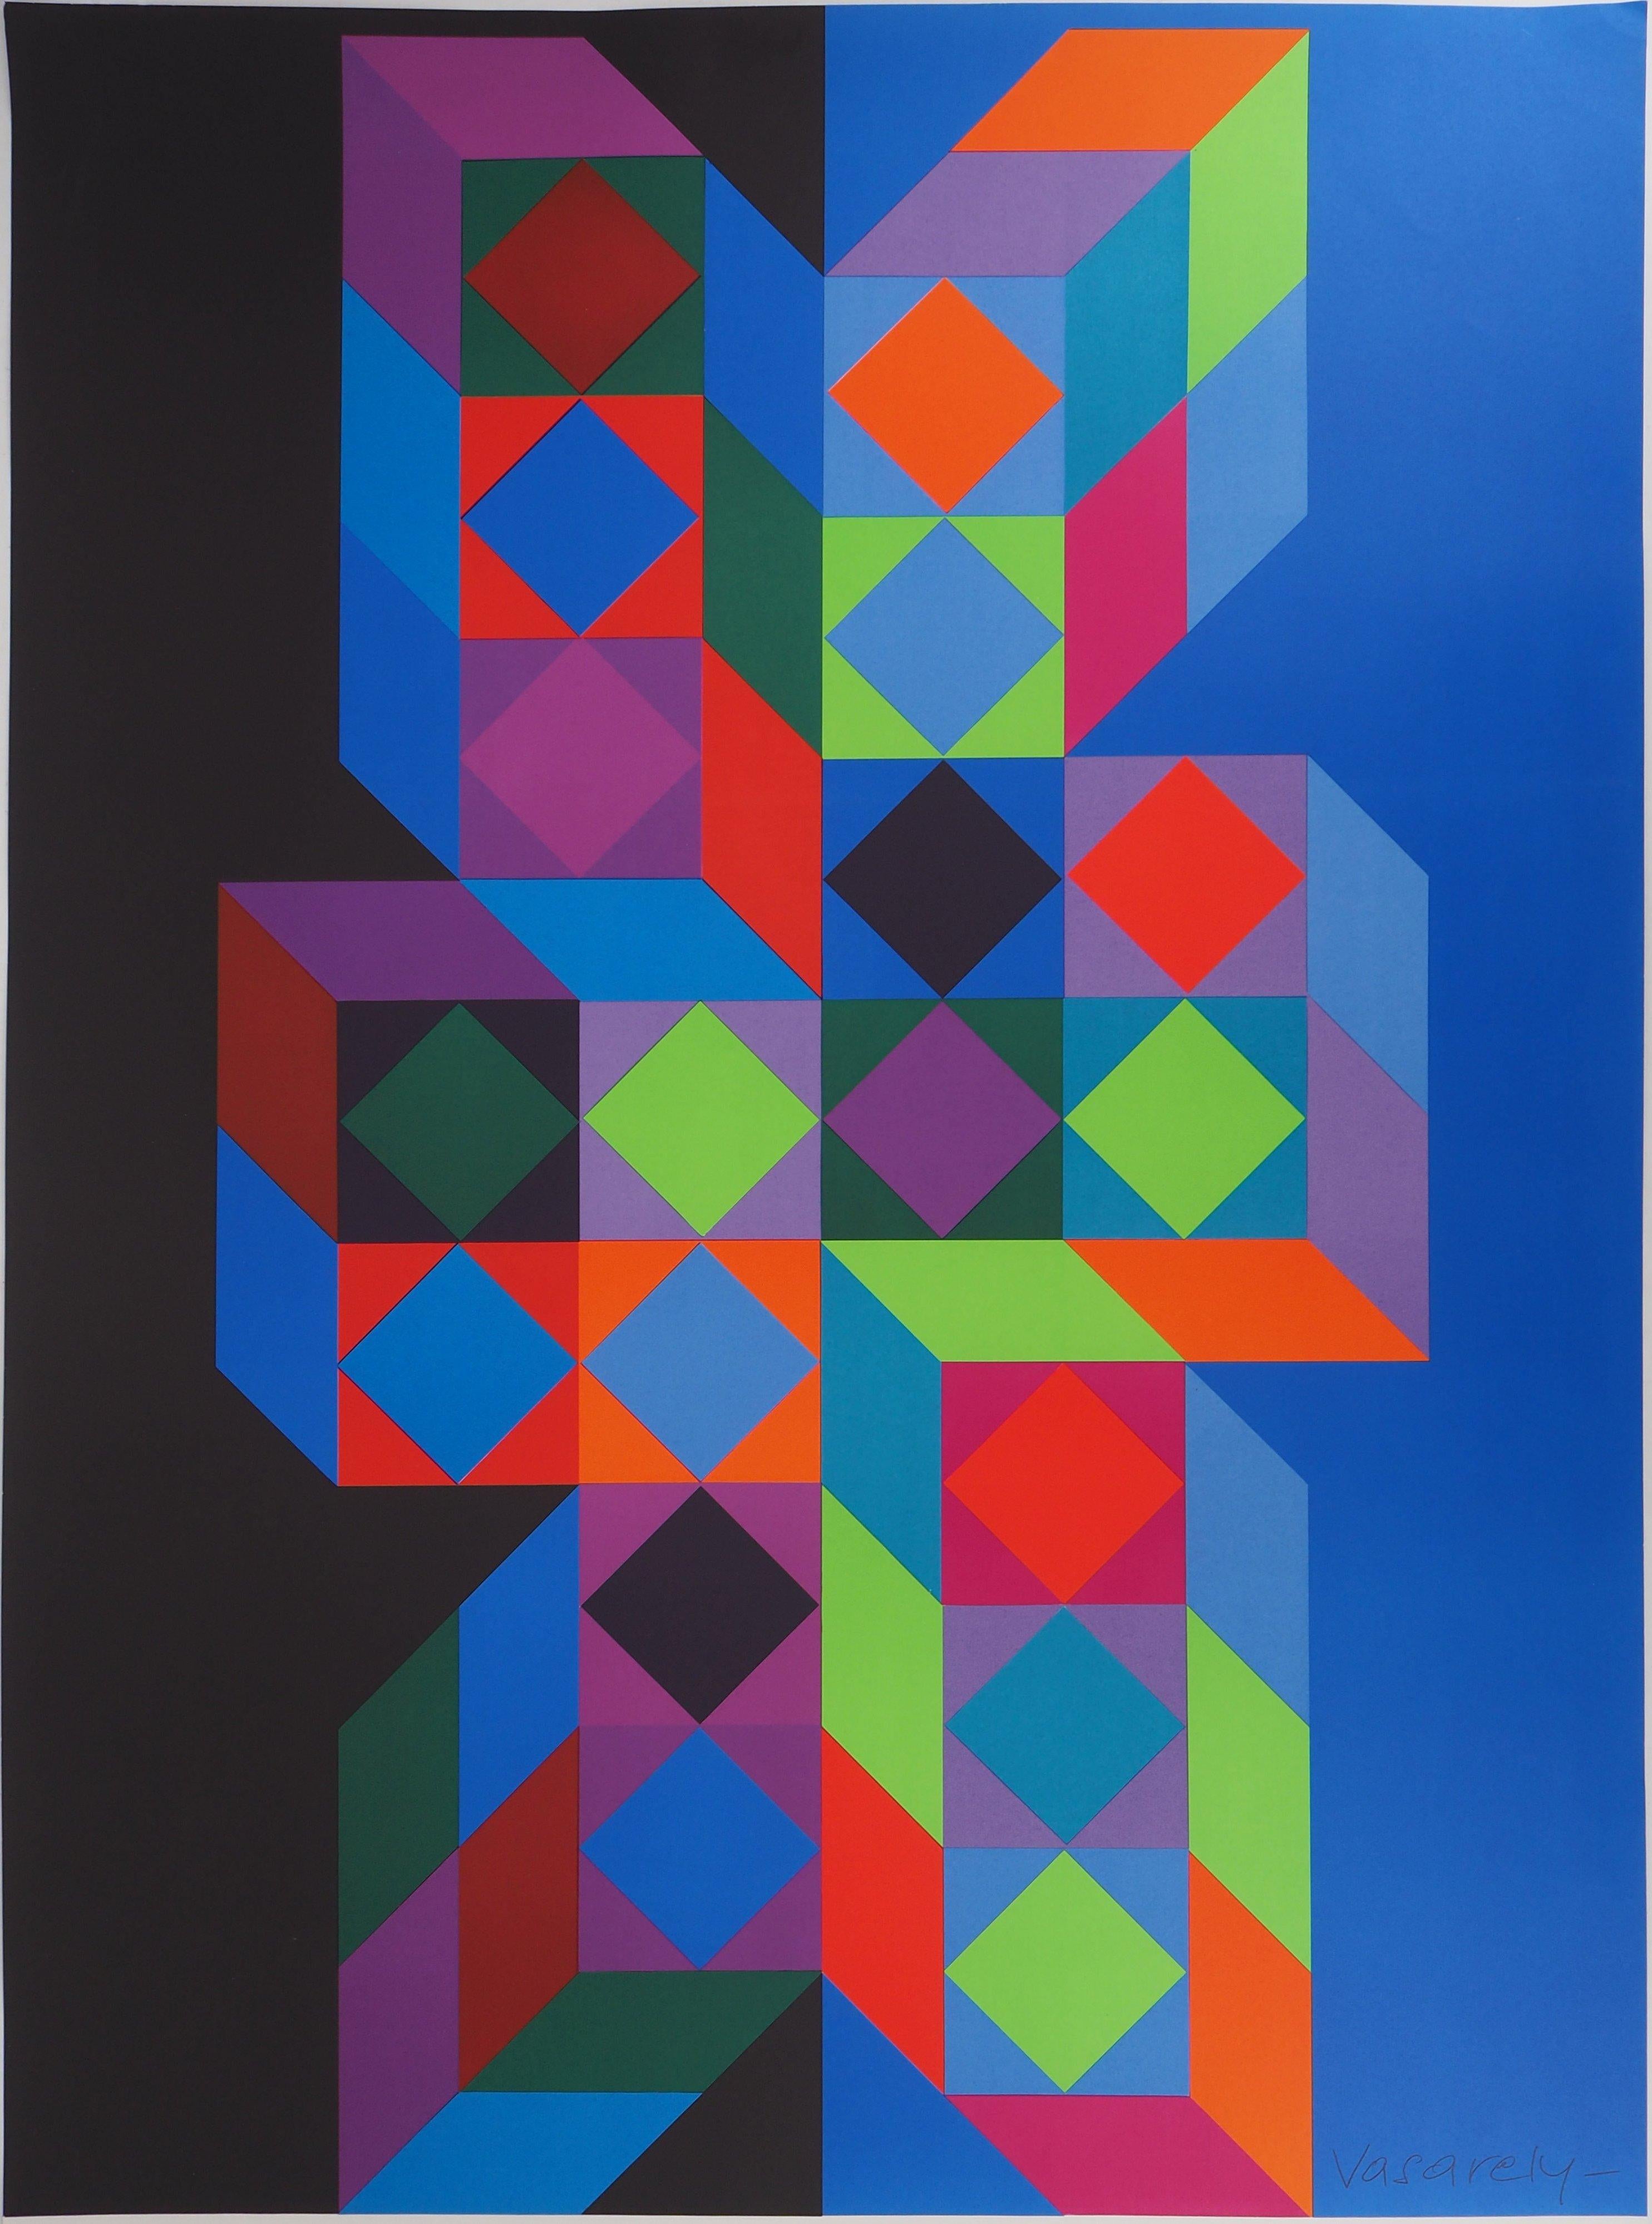 Cinetic Geometric - Screen Print (Olympic Games Munich 1972) - Purple Figurative Print by After Victor Vasarely